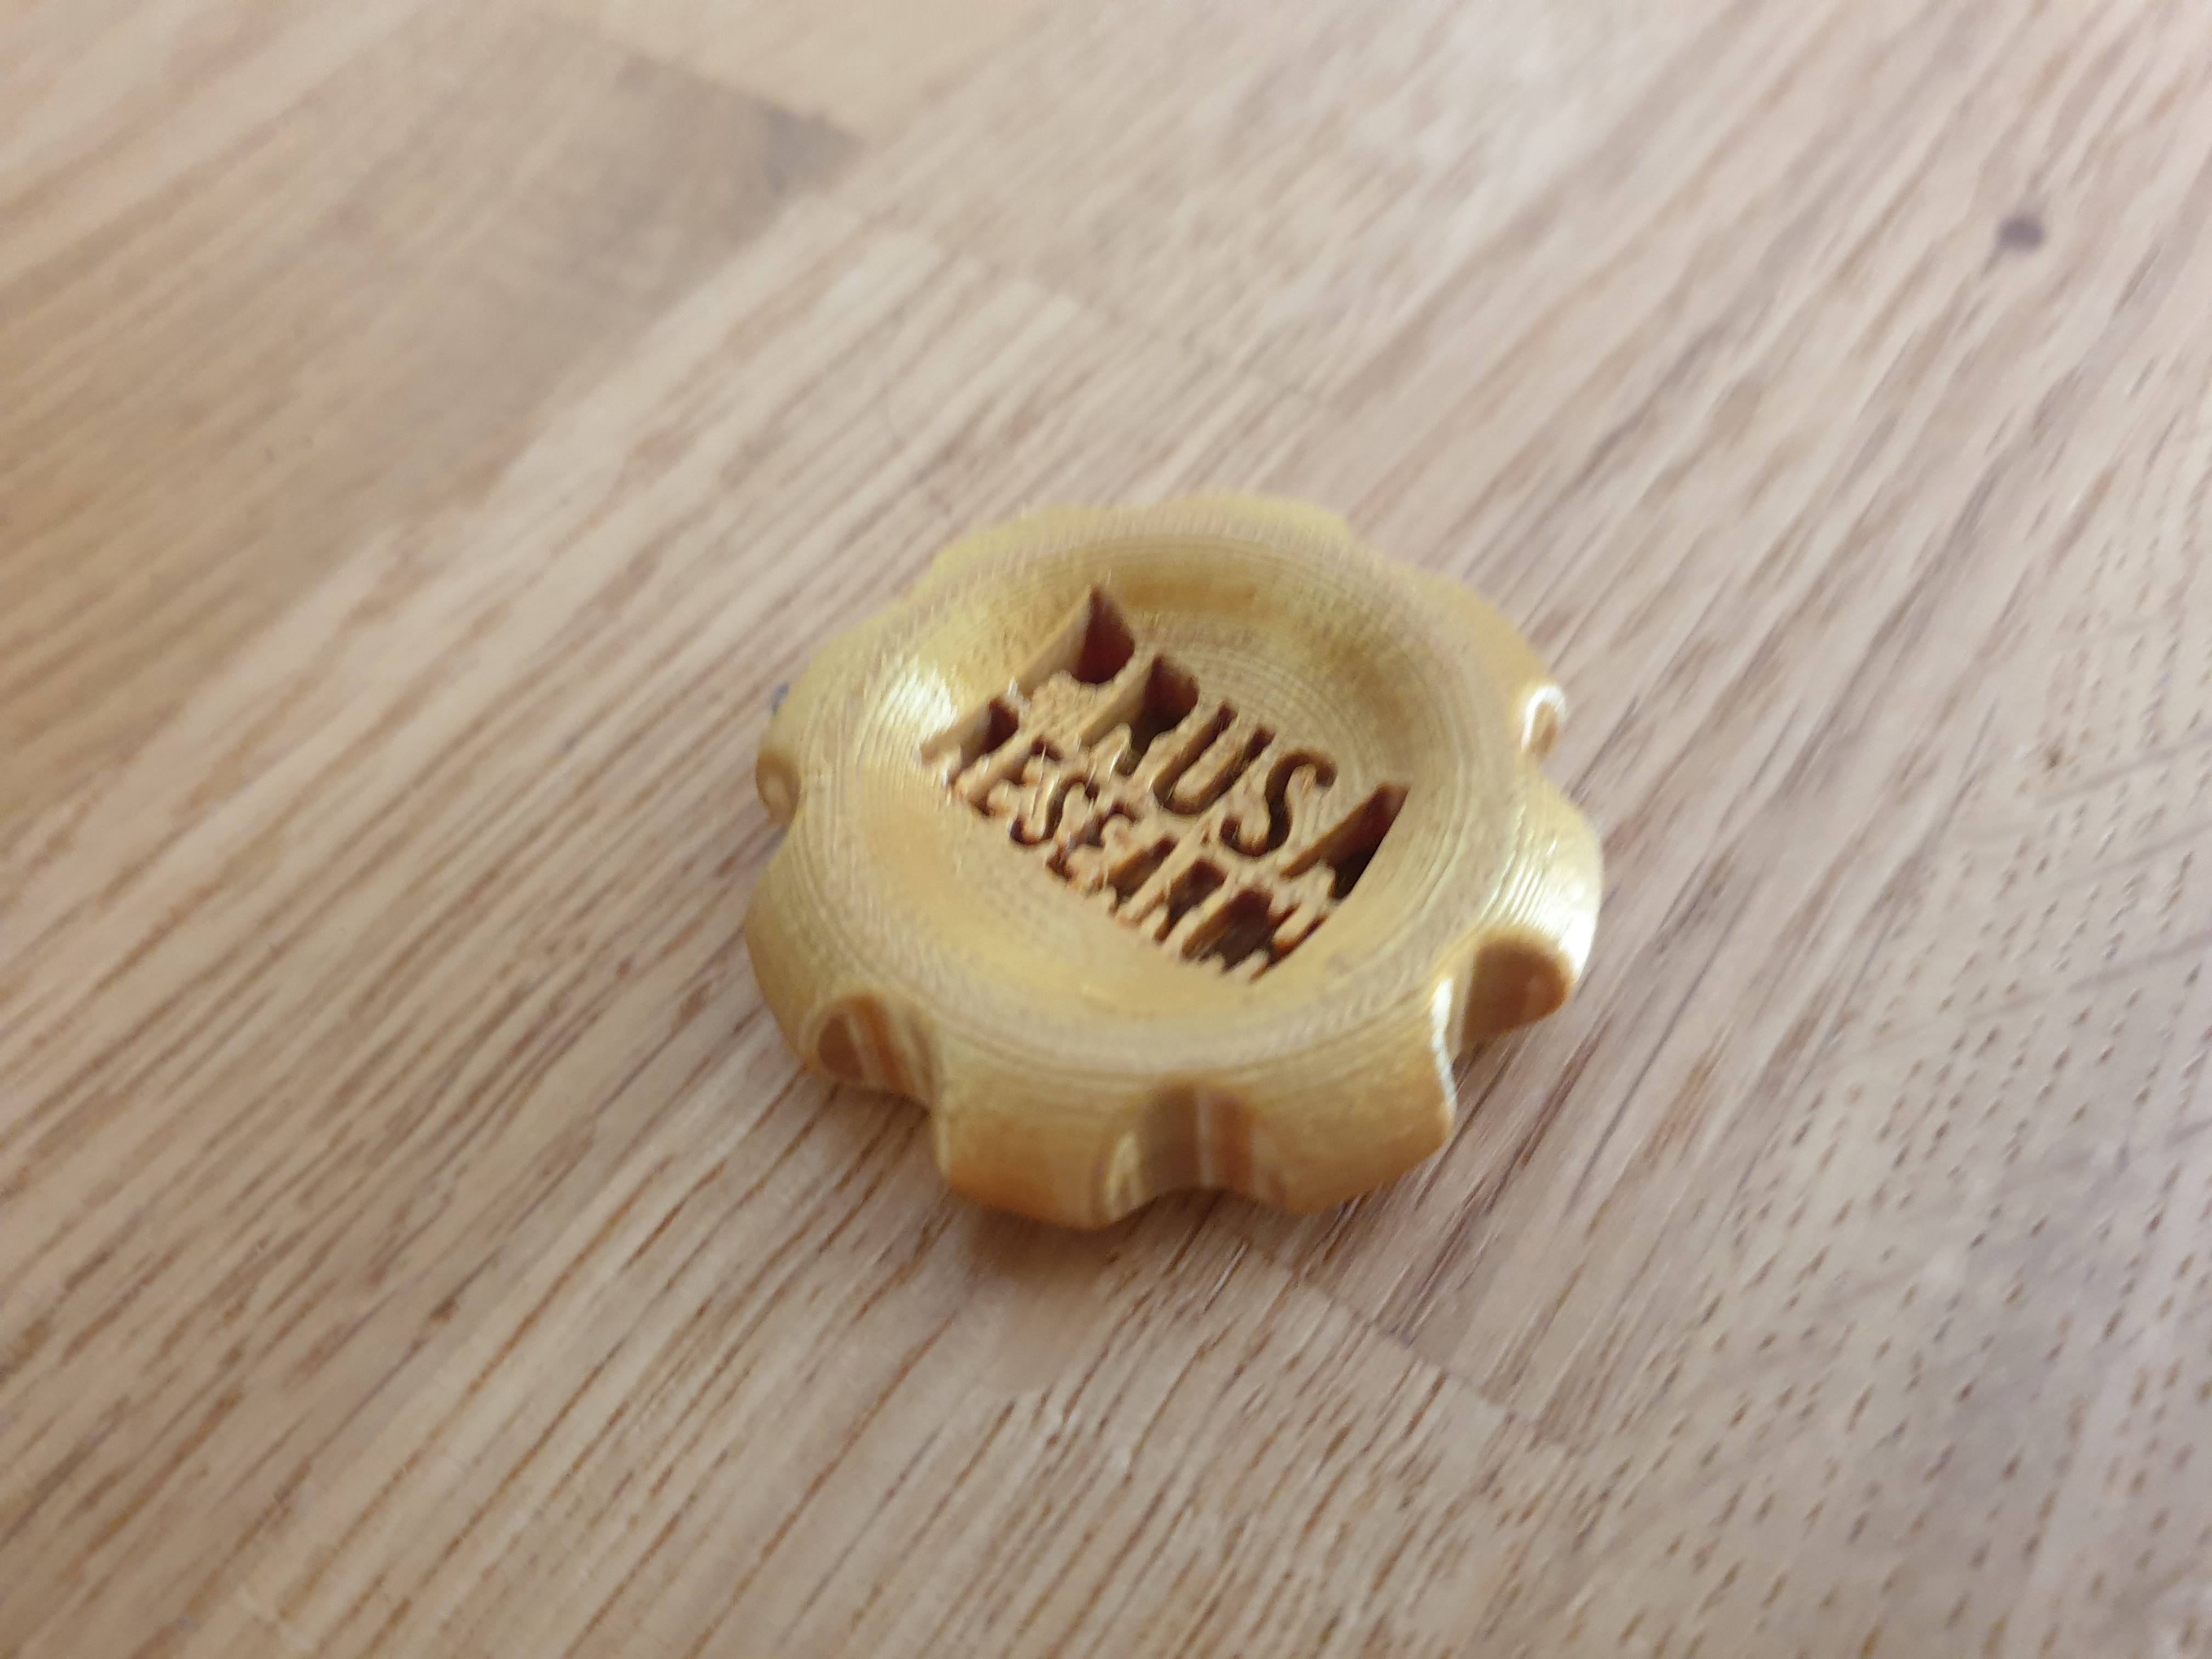 Prusa Research Maker Coin